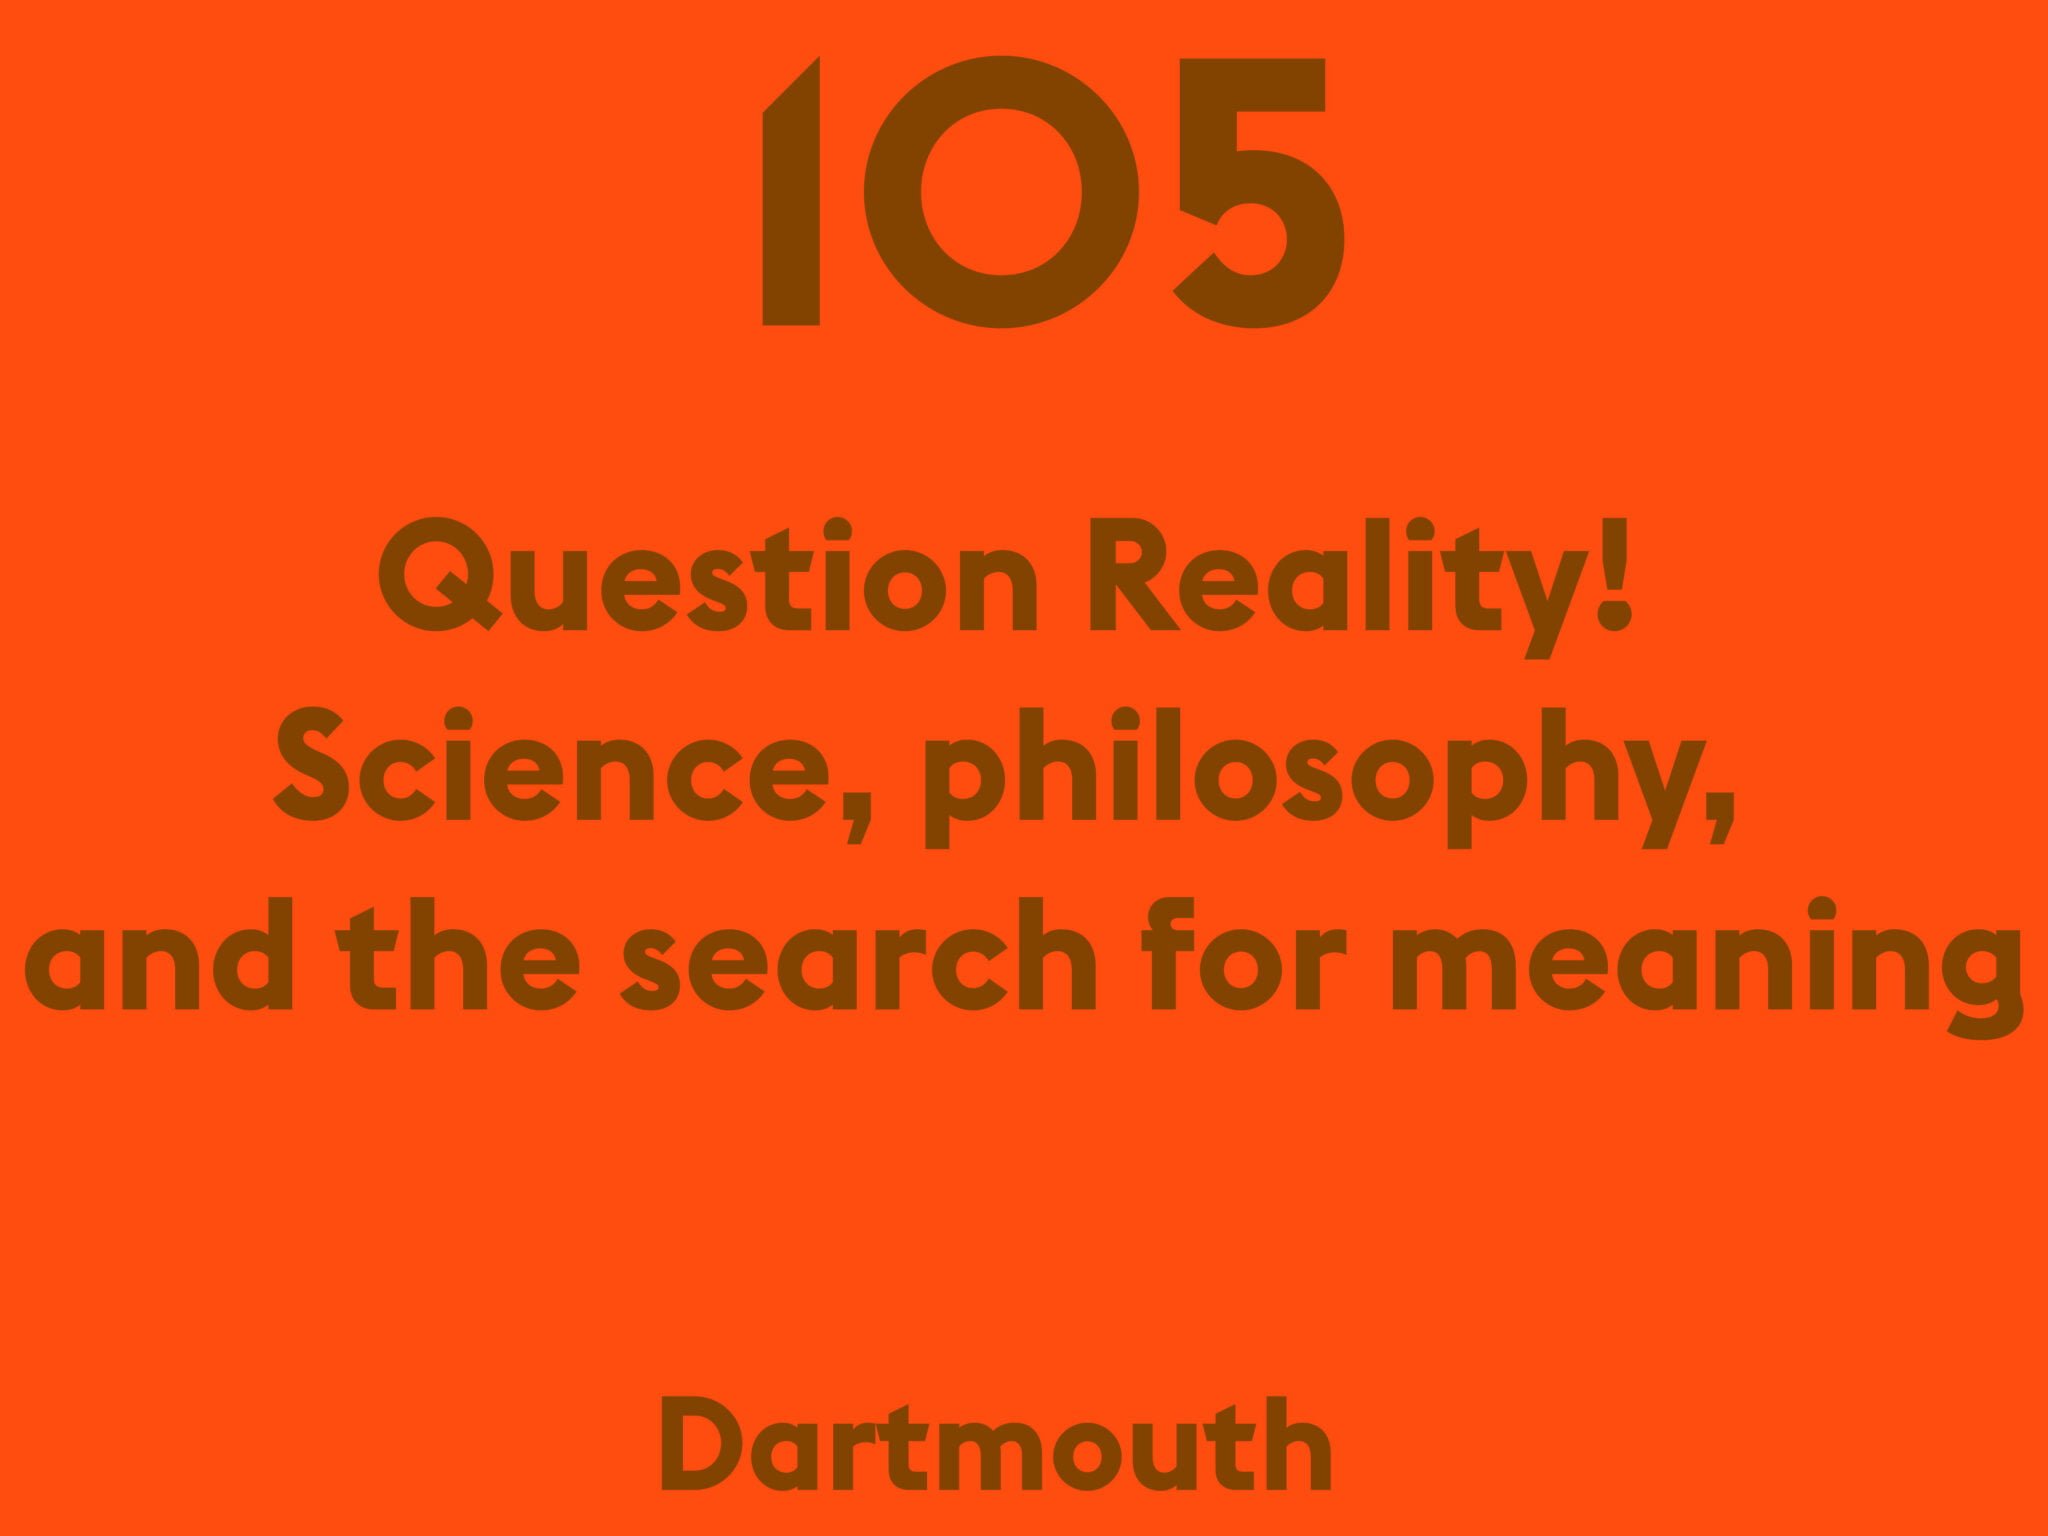 Question Reality! Science